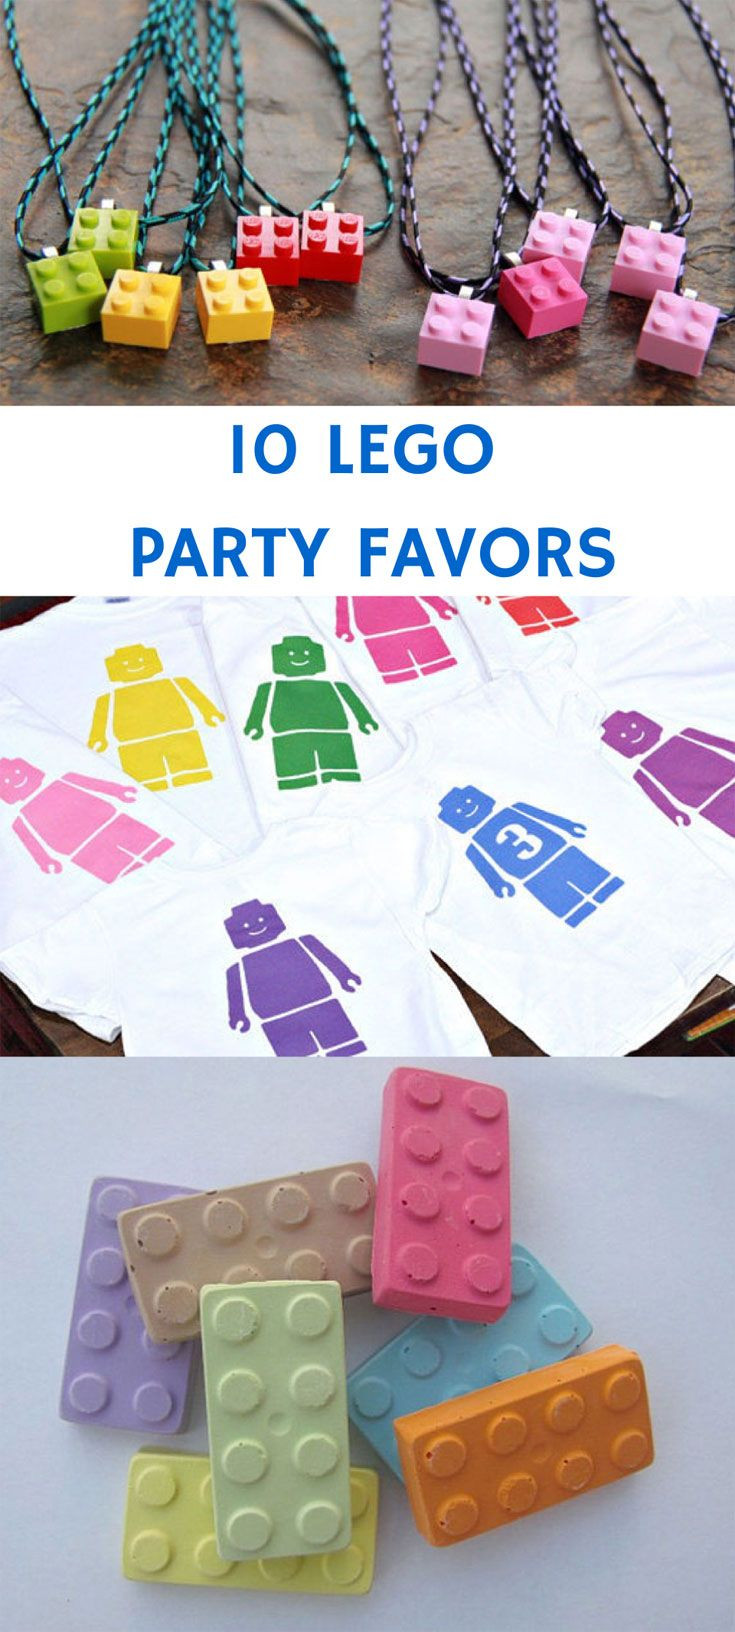 Lego Friends Birthday Party Supplies
 10 LEGO PARTY FAVORS